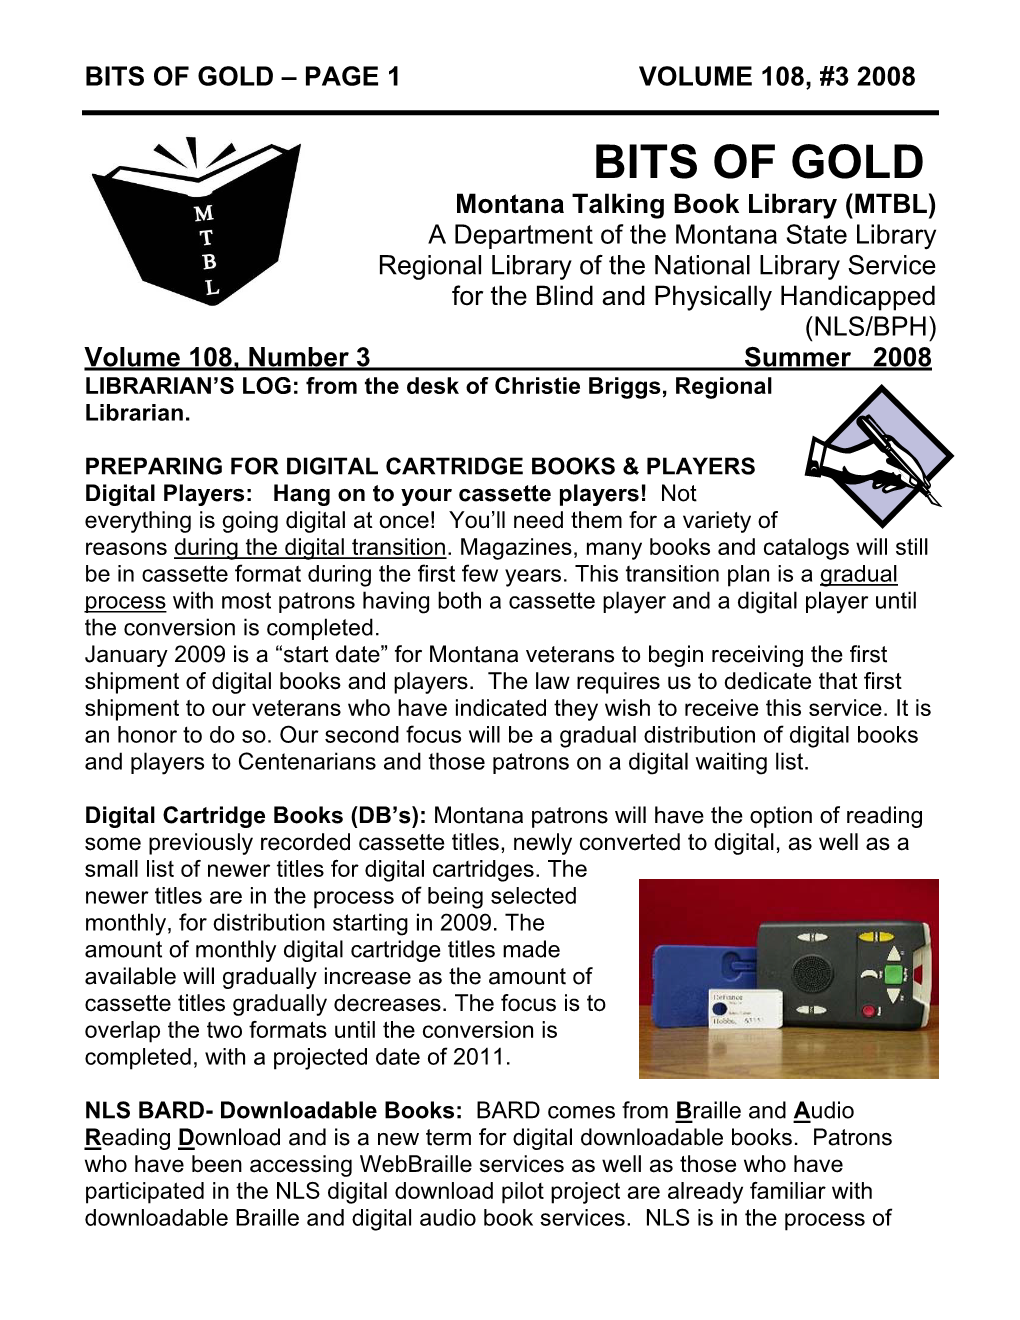 Bits of Gold – Page 1 Volume 108, #3 2008